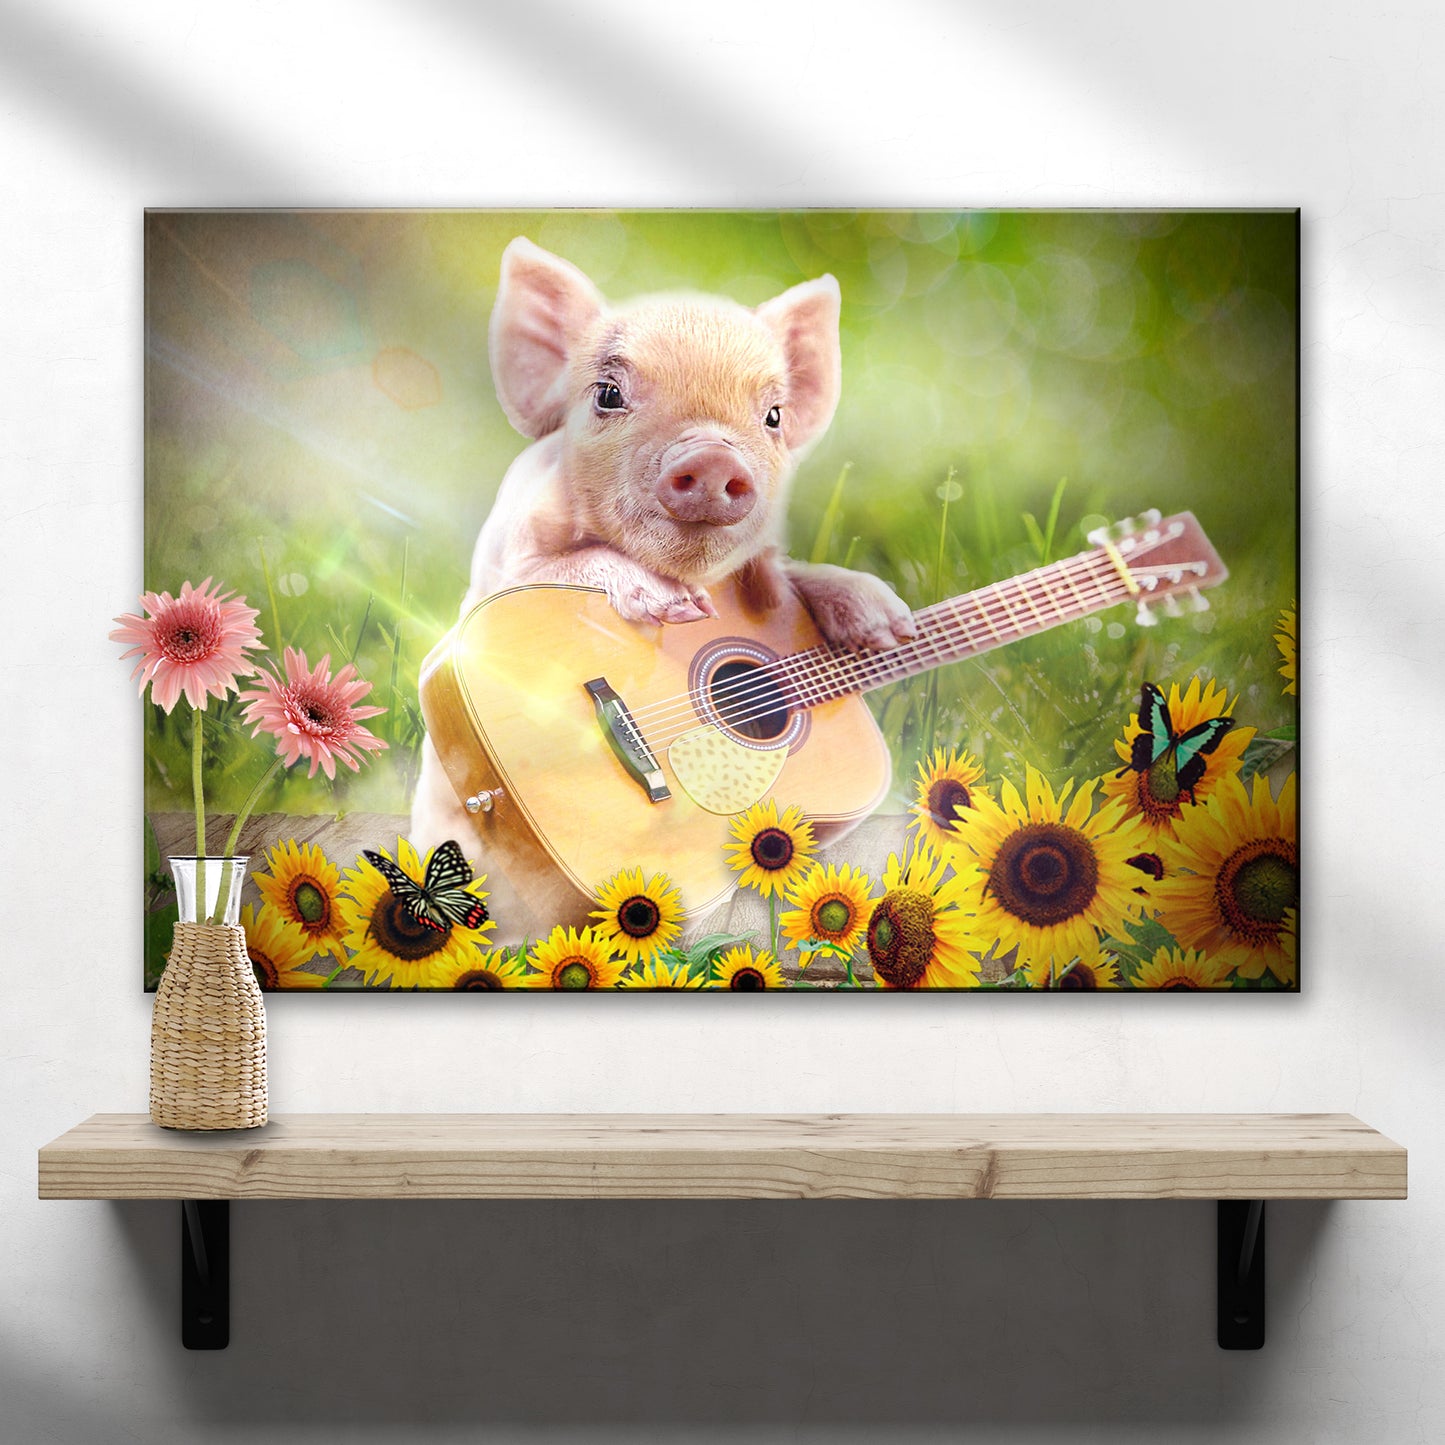 Guitarist Piglet Canvas Wall Art - Image by Tailored Canvases